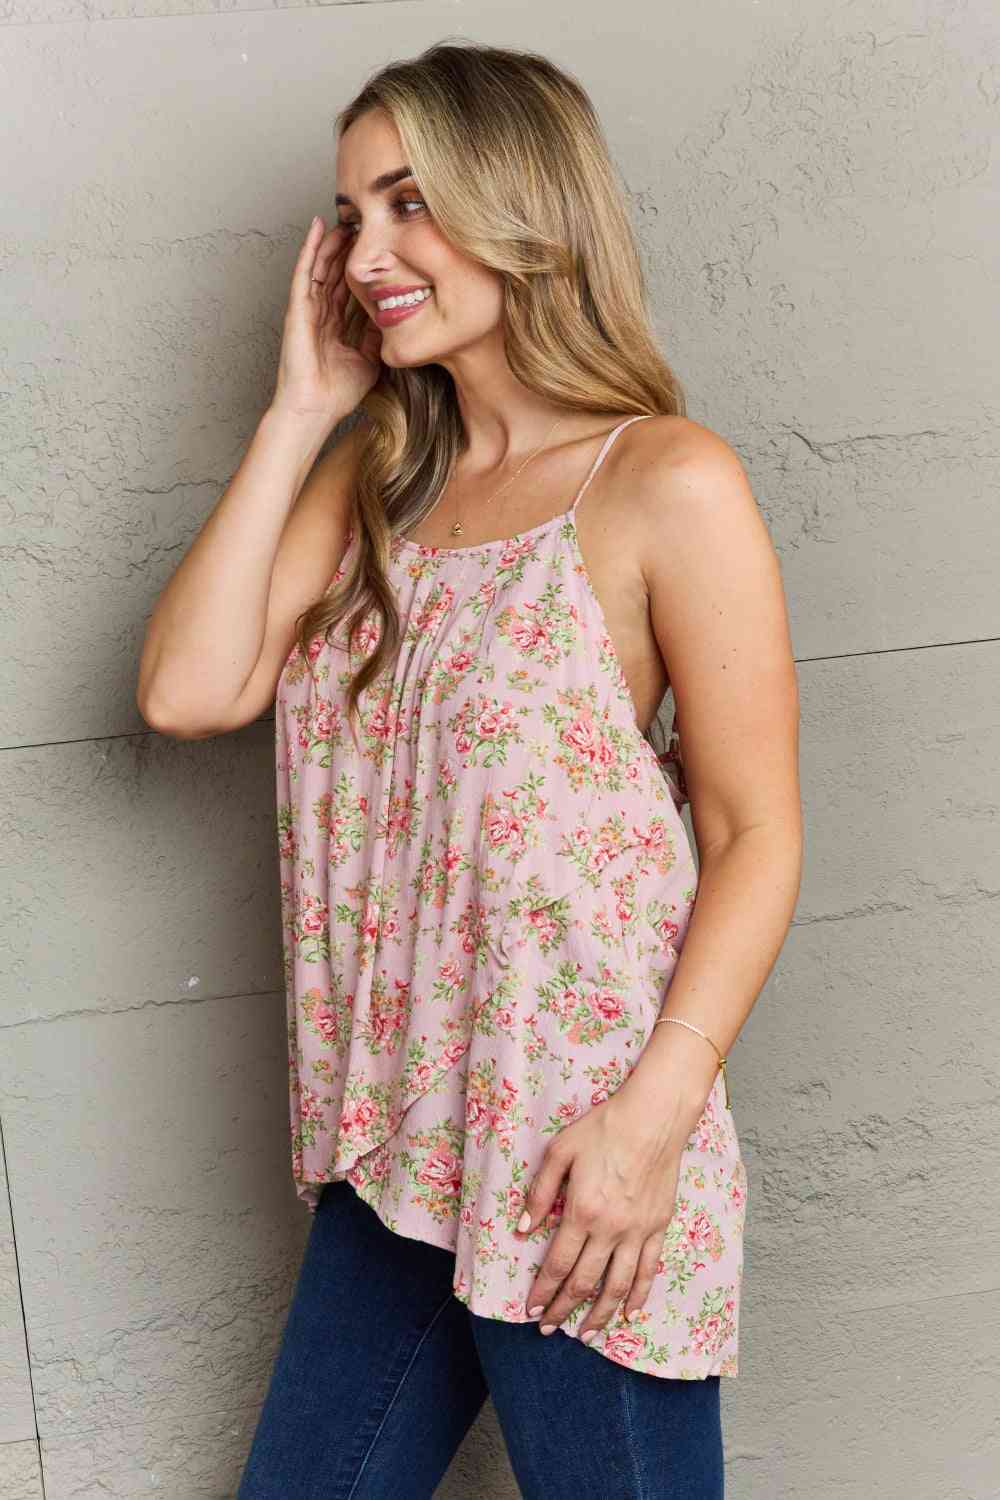 Ninexis Hang Loose Tulip Hem Cami Top in Mauve Floral Print on any thing USA/STOD clothes